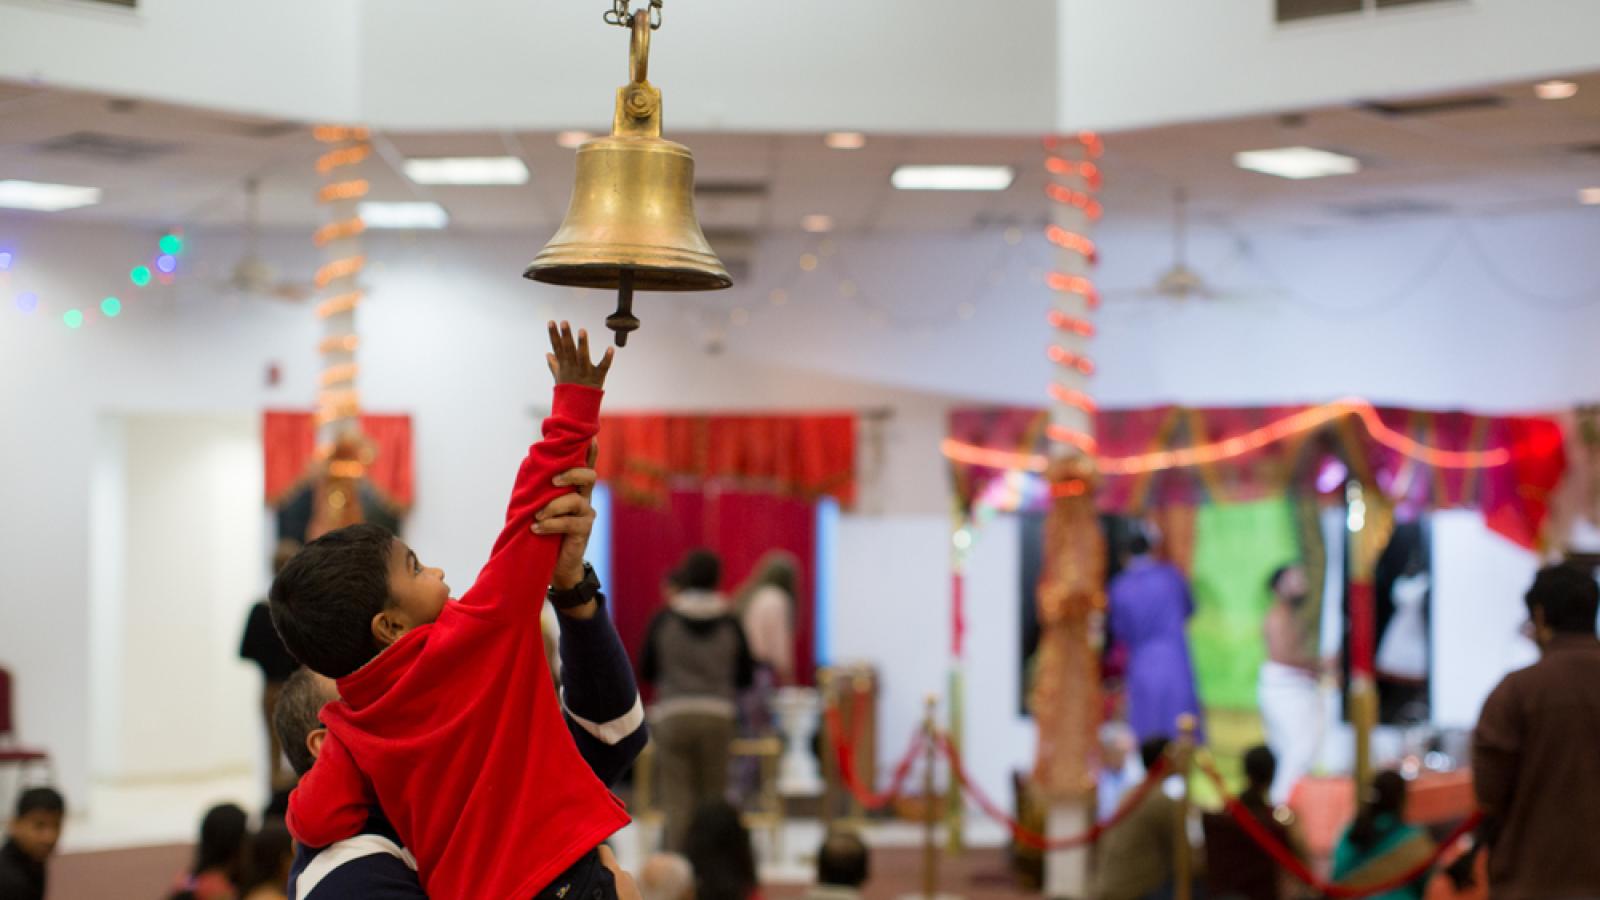 A man holds up a small boy, he is reaching to ring a large bell suspended from the ceiling